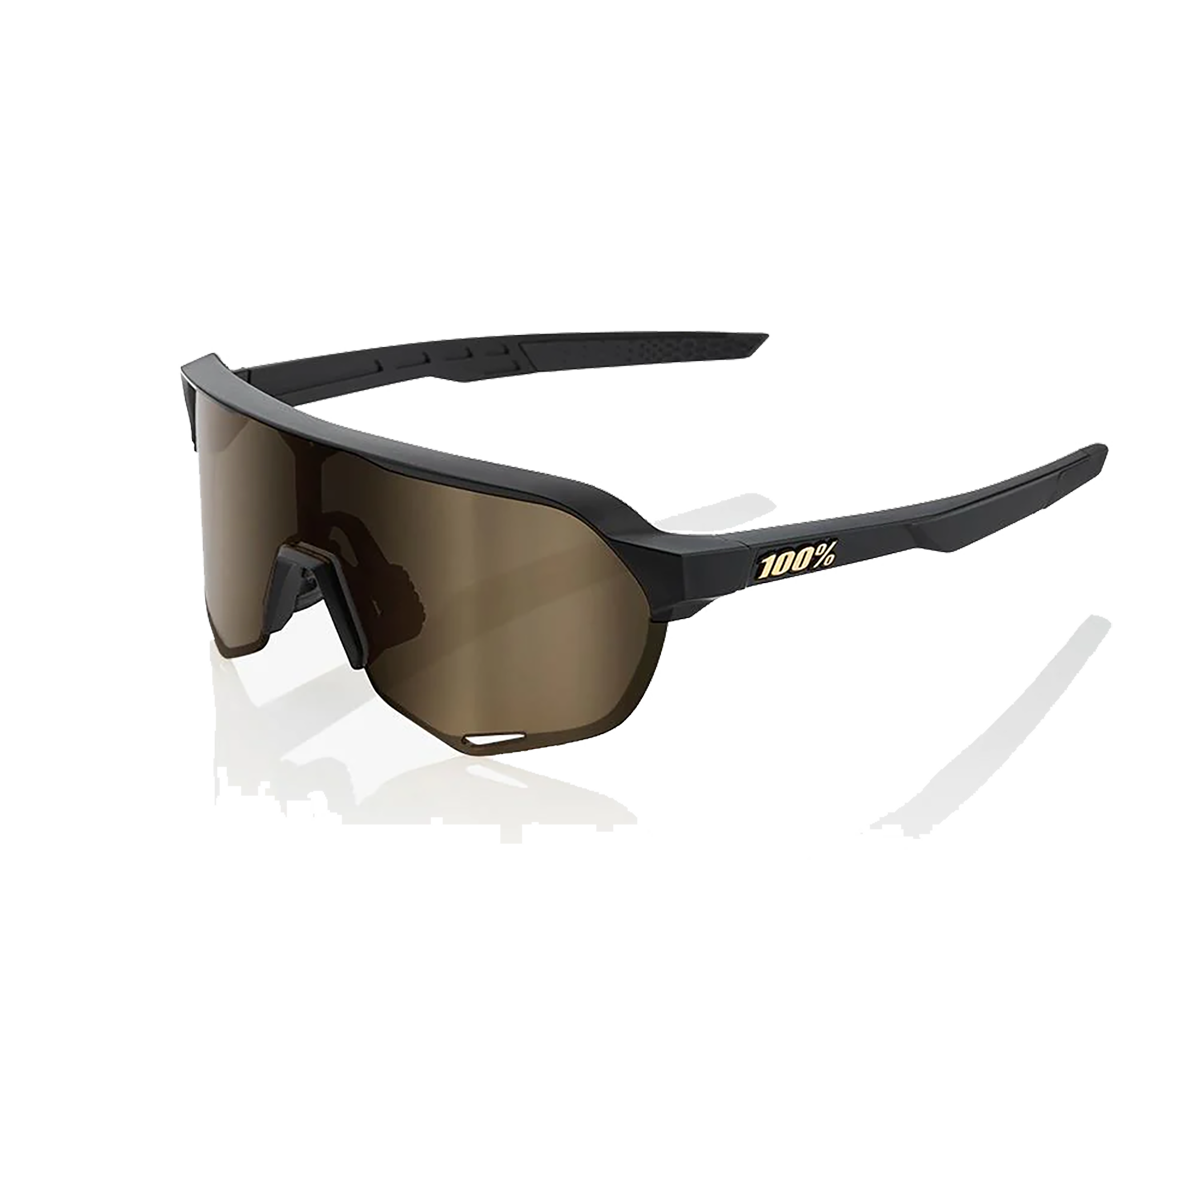 100% S2 Mirror Sunglasses, , large image number null